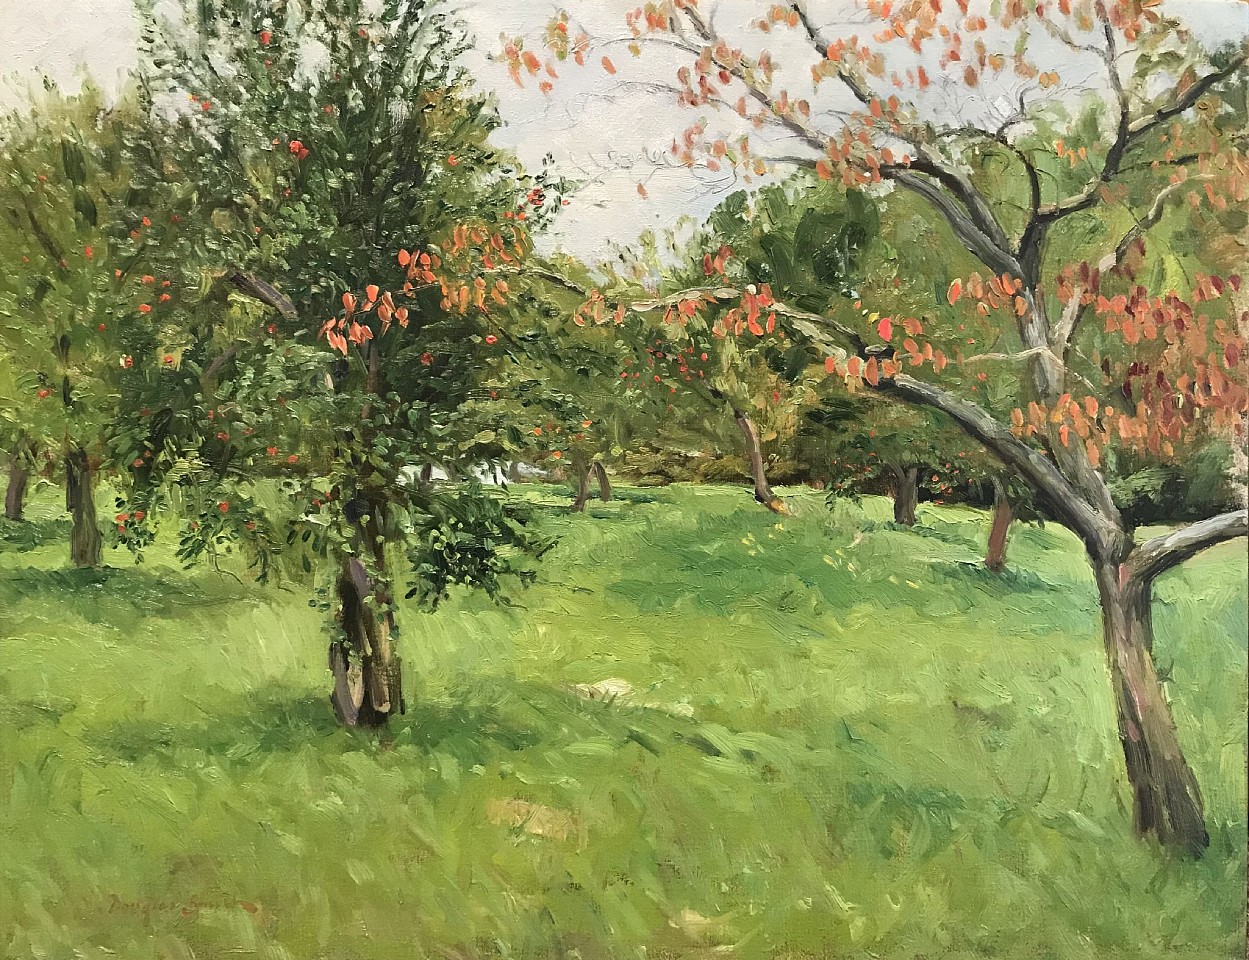 Douglas Smith, Apple Orchard, Smith Neck Road
oil on canvas, 14" x 18"
signed Douglas SMith, lower left
titled and dated verso
JWC 0119.14
$1,500